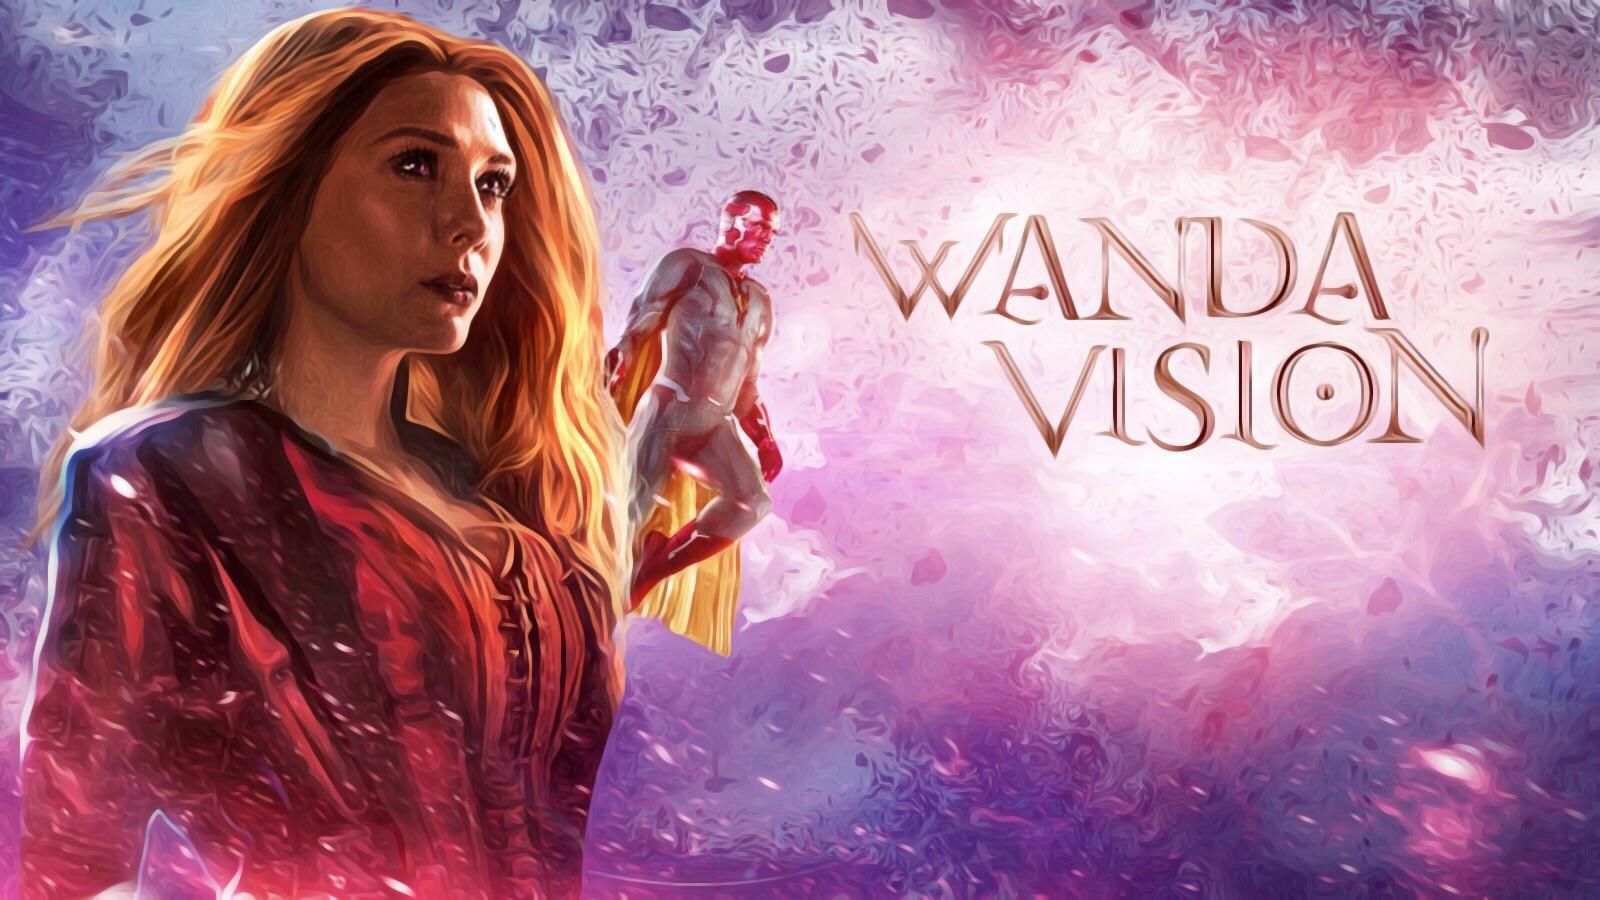 Wanda and Vision Avatars from WandaVision Added to Disney Options   LaughingPlacecom